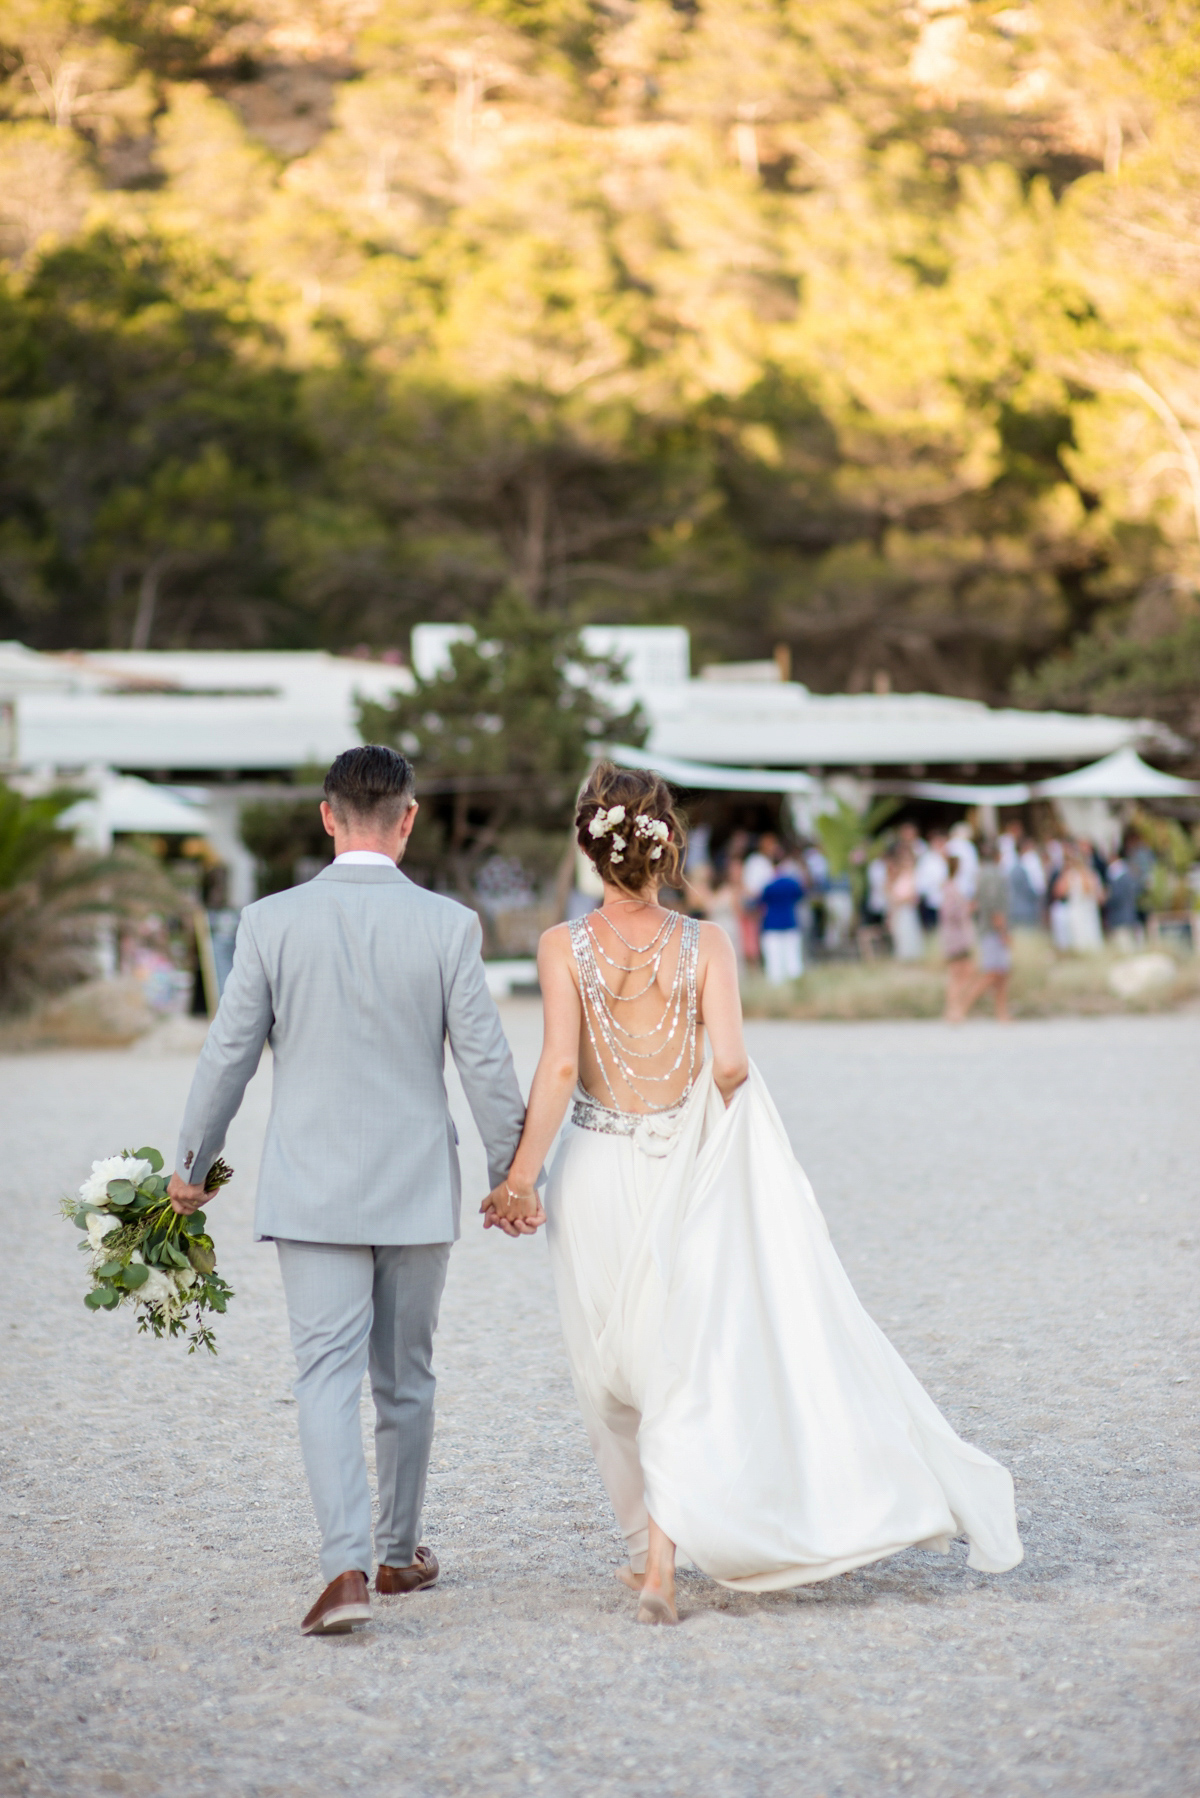 Leanne wore the Cleopatra gown by Amanda Wakeley for her spiritual and nature inspired wedding on the shores of Ibiza. Photography by Gypsy Westwood.